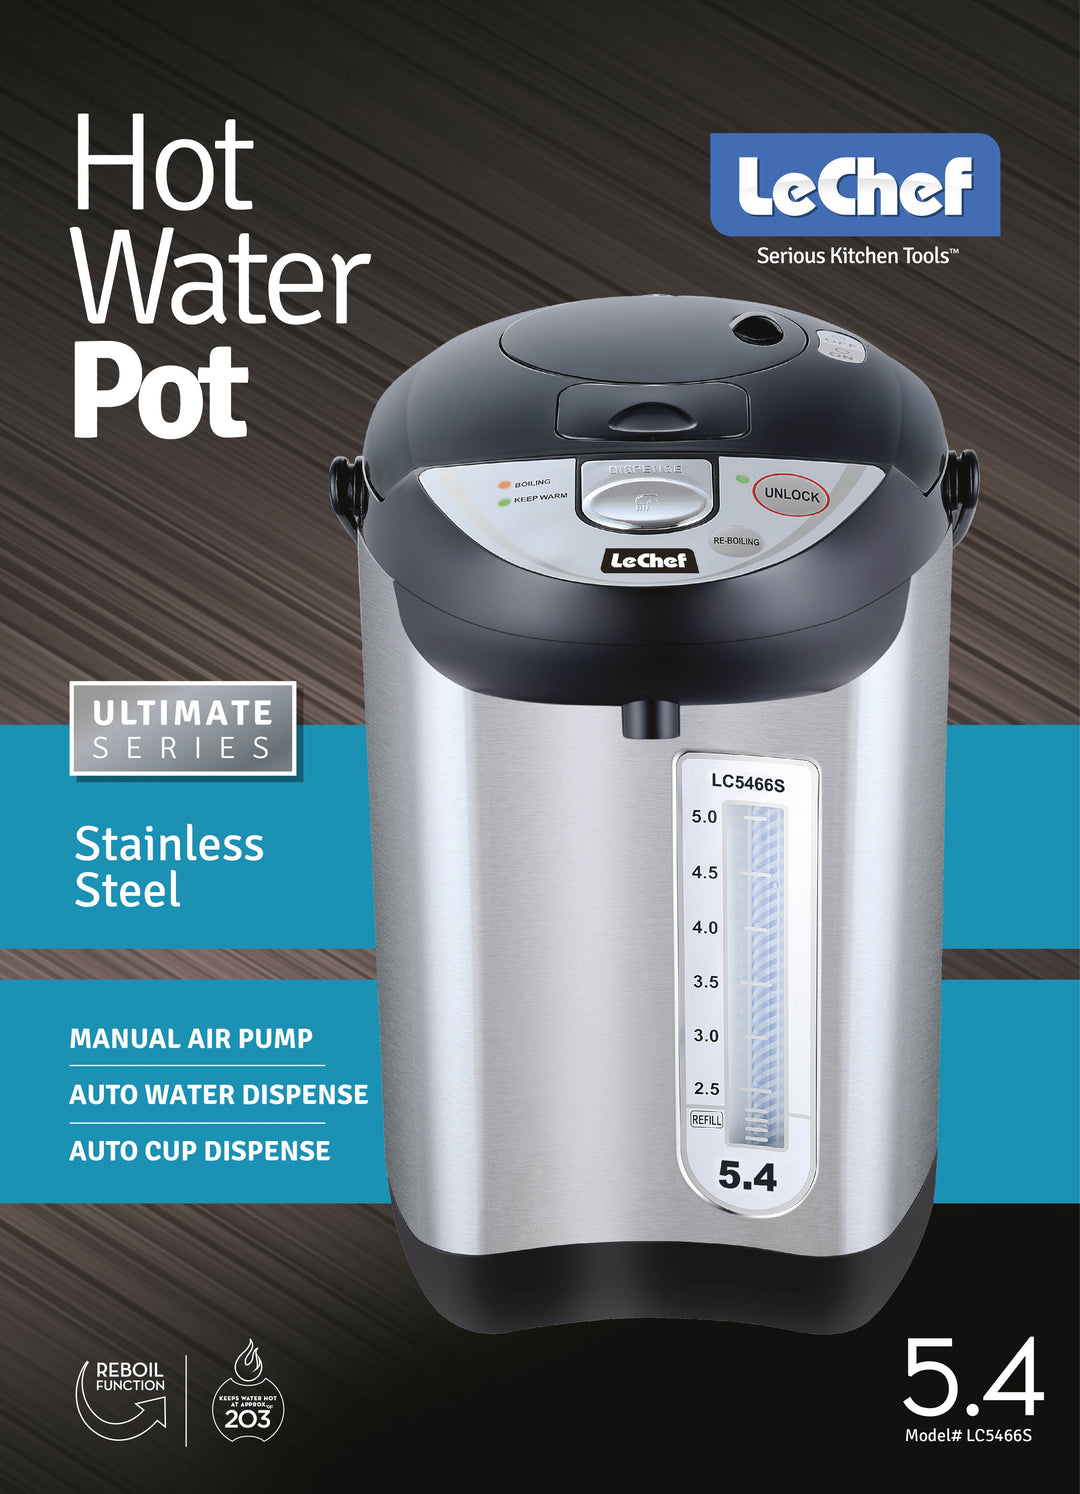 LE'CHEF ELECTRIC HOT WATER POT 5.0 QT MODEL# LC5477S WITH SHABBAT